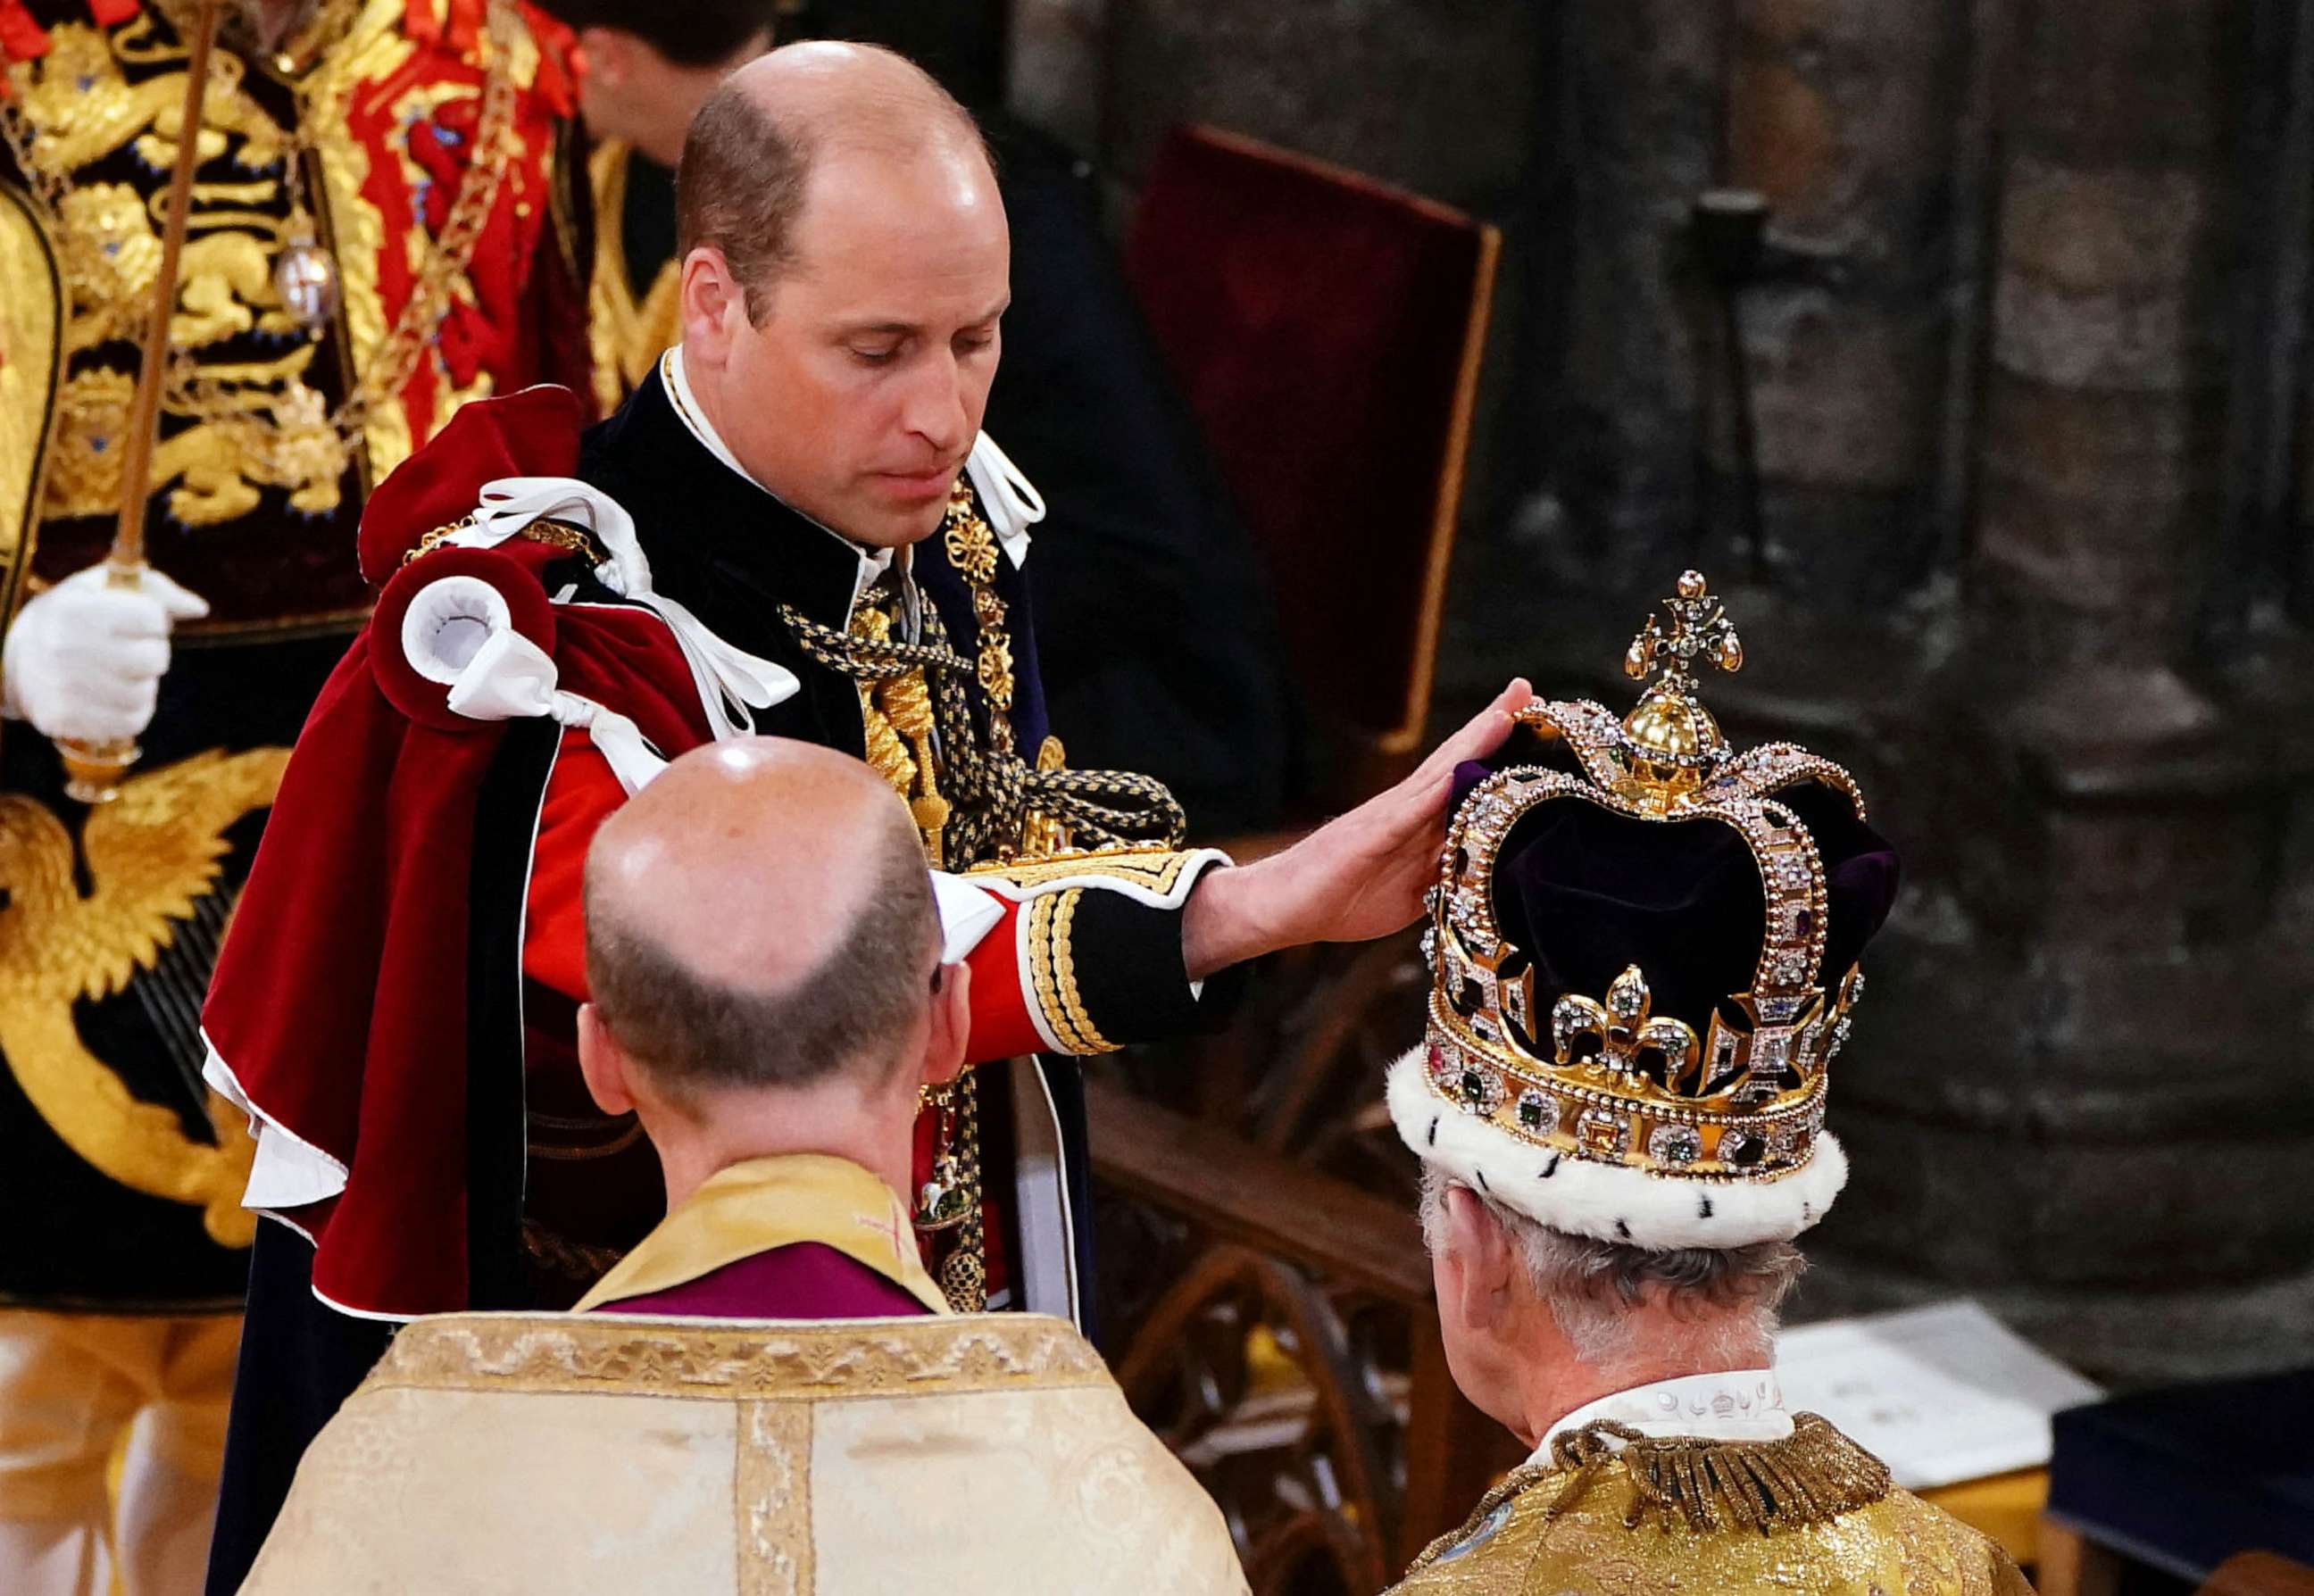 PHOTO: The Prince of Wales touches St Edward's Crown on King Charles III's head during his coronation ceremony in Westminster Abbey, London, May 6, 2023.